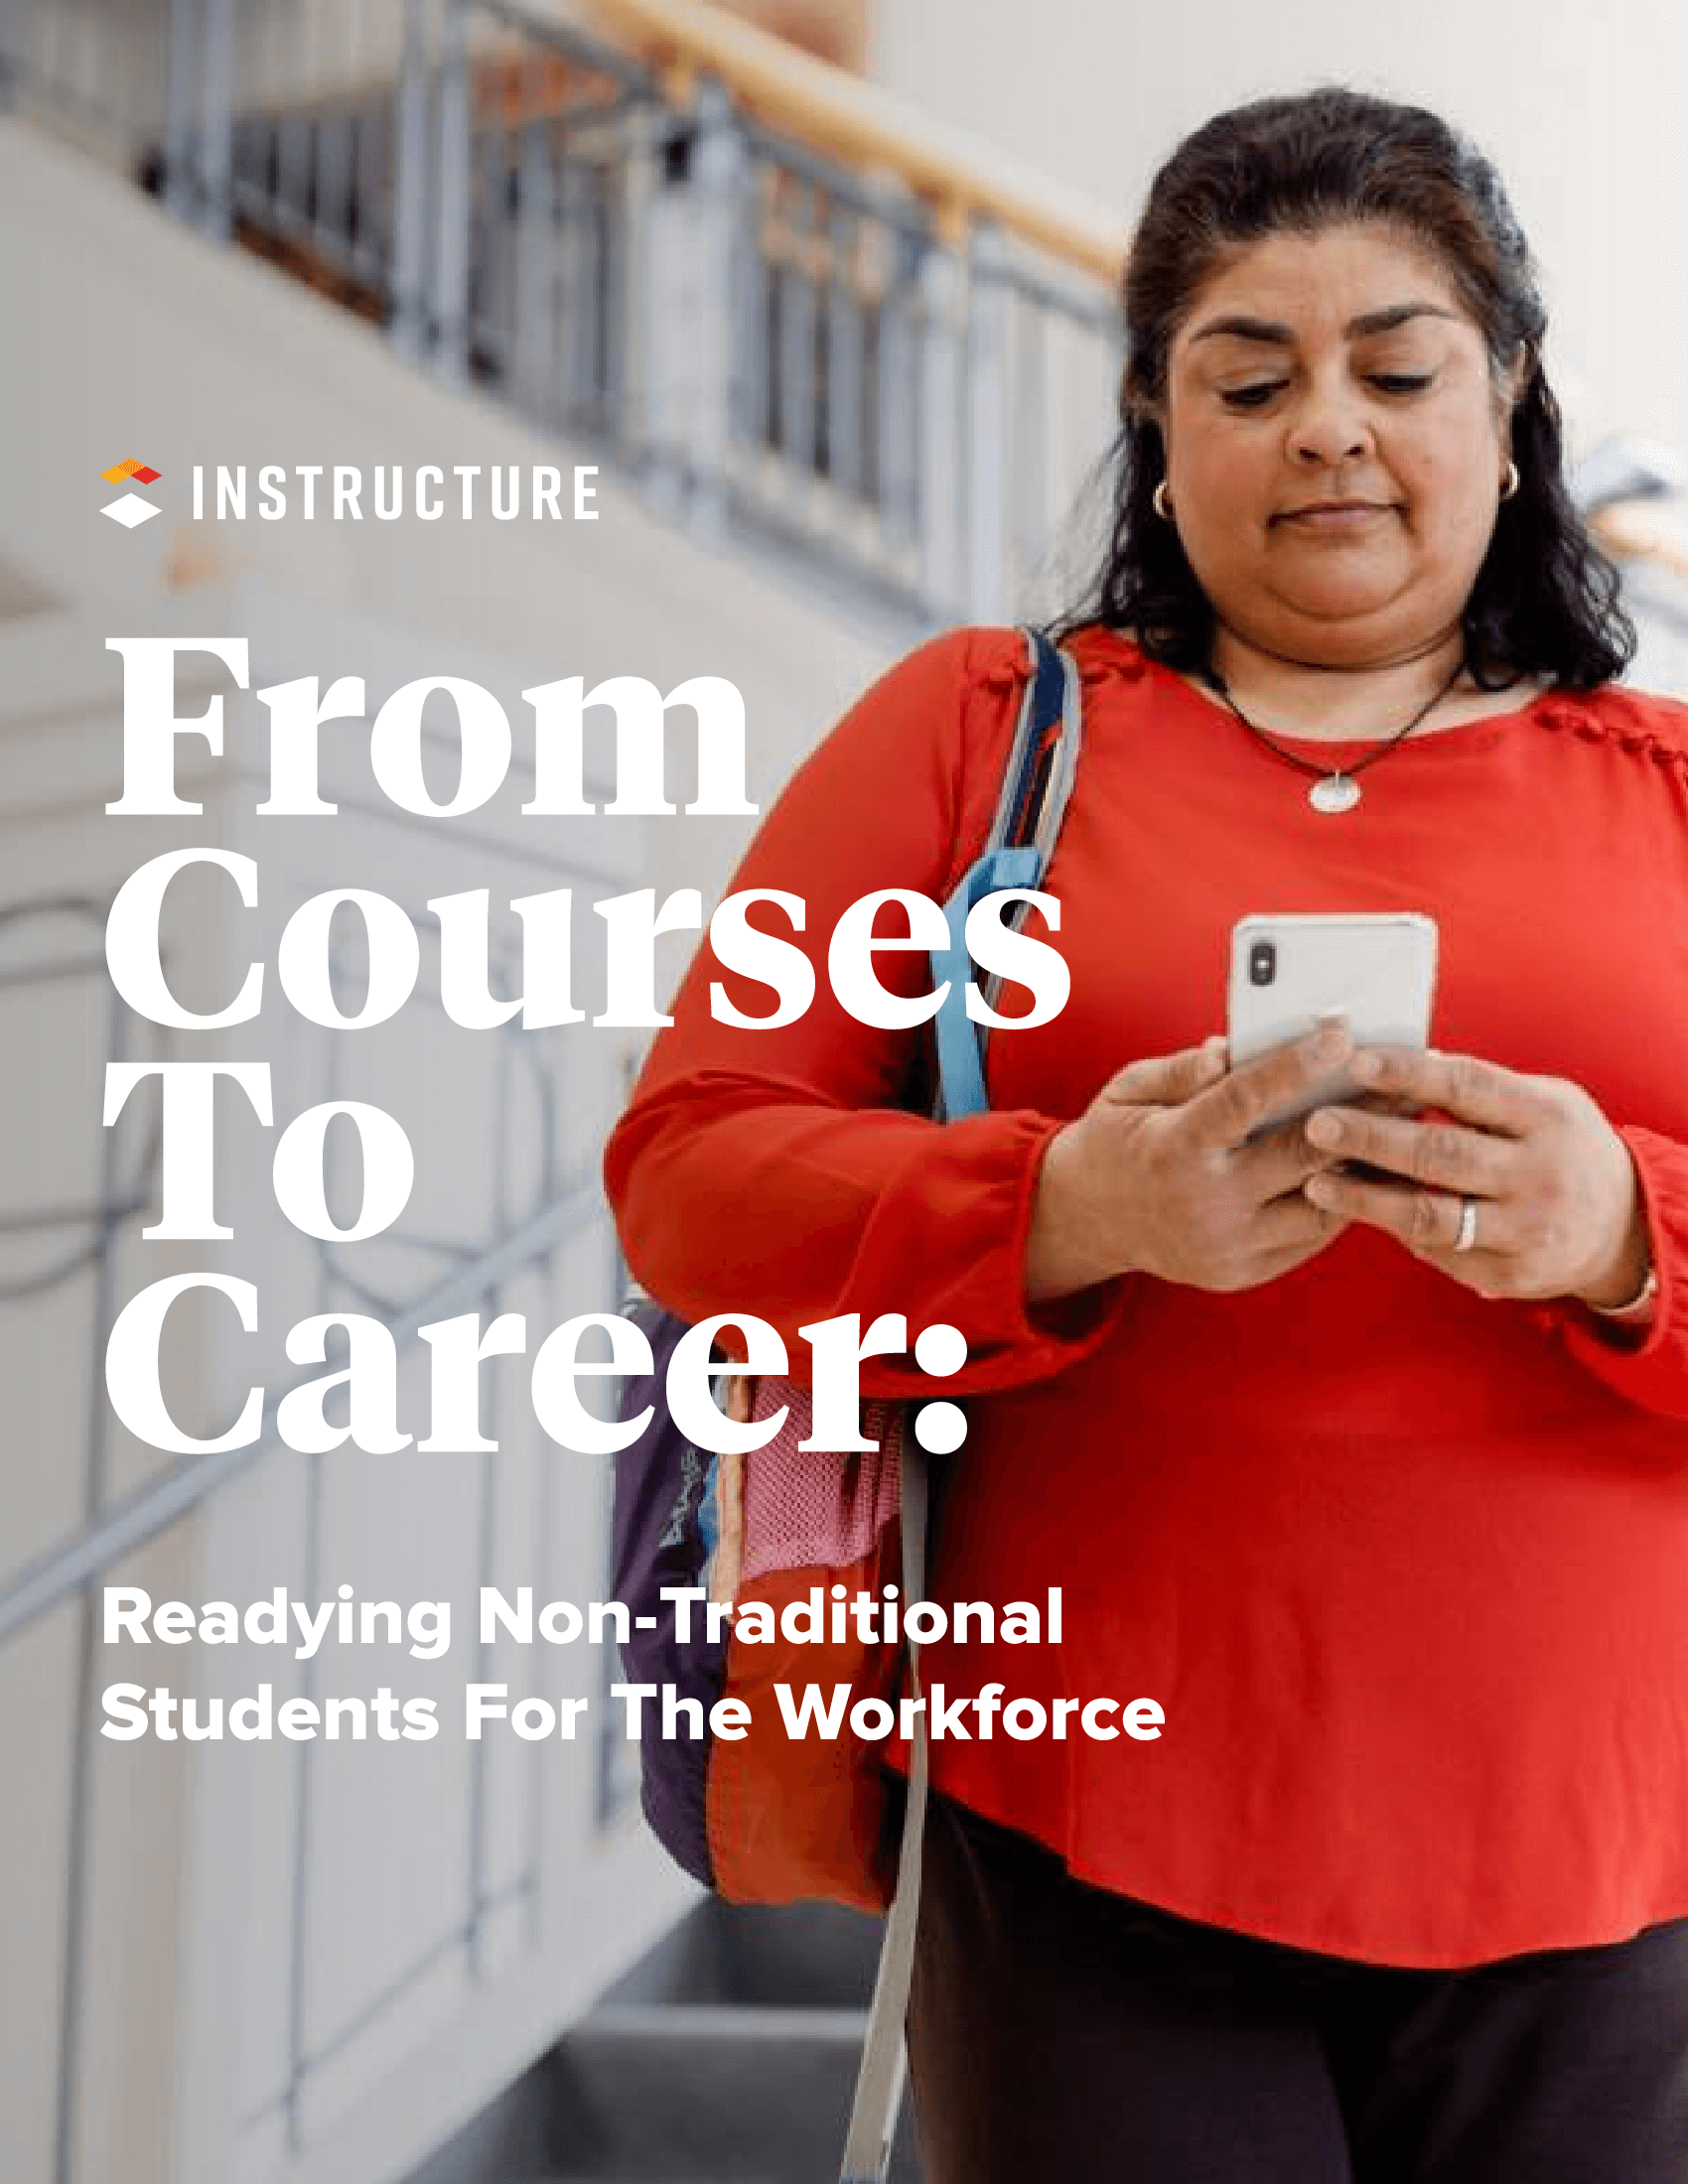 From Courses to Career: Readying Non-Traditional Students for the Workforce